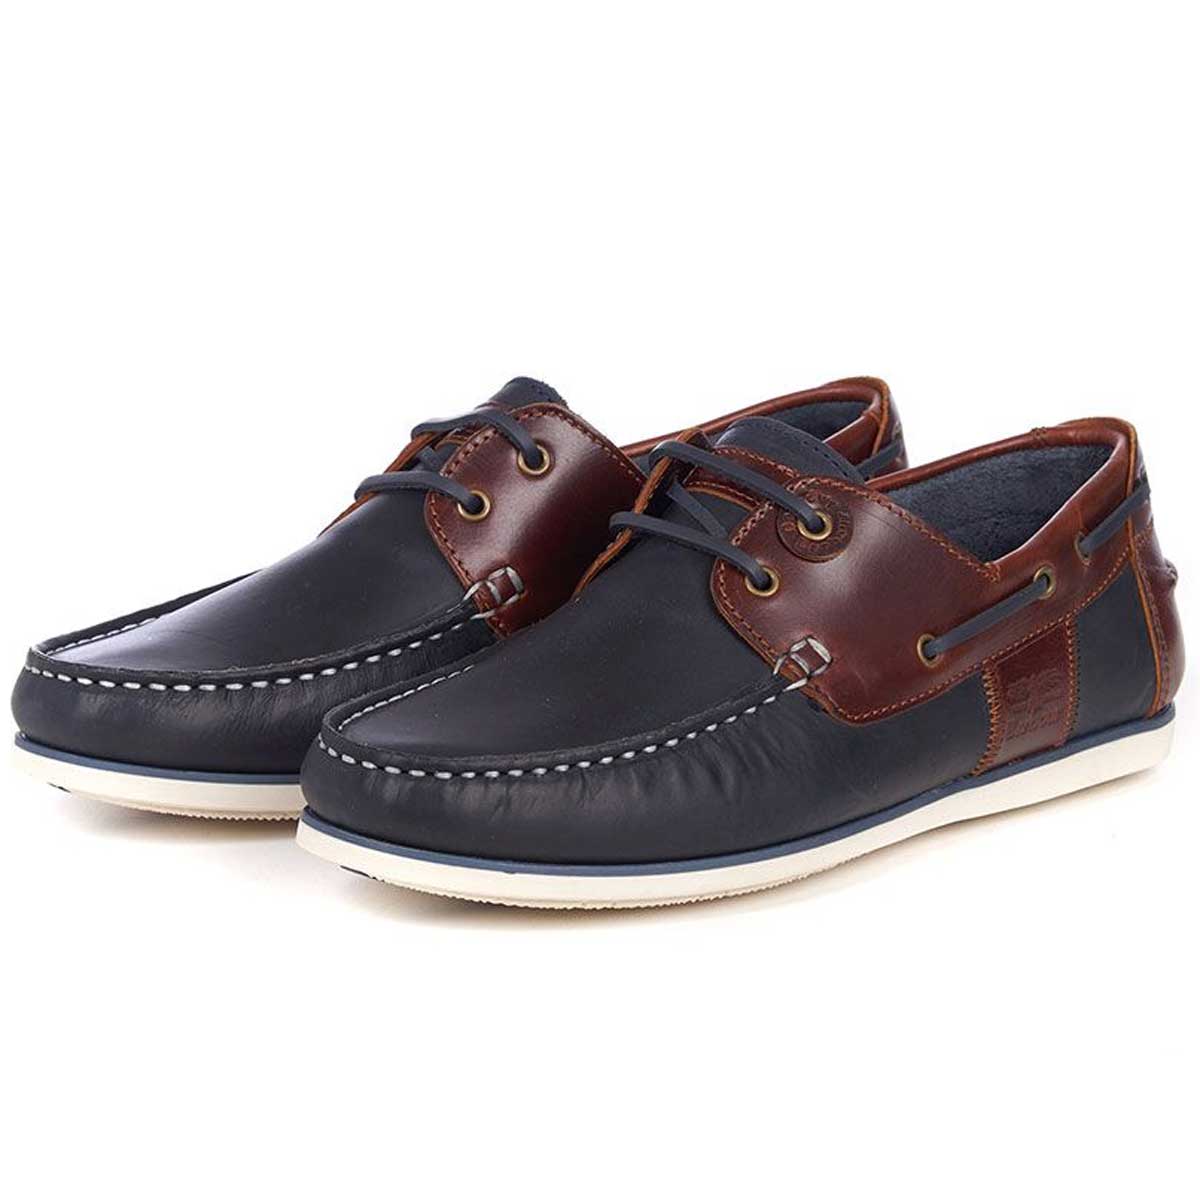 BARBOUR Capstan Boat Shoes - Mens Leather - Navy & Brown